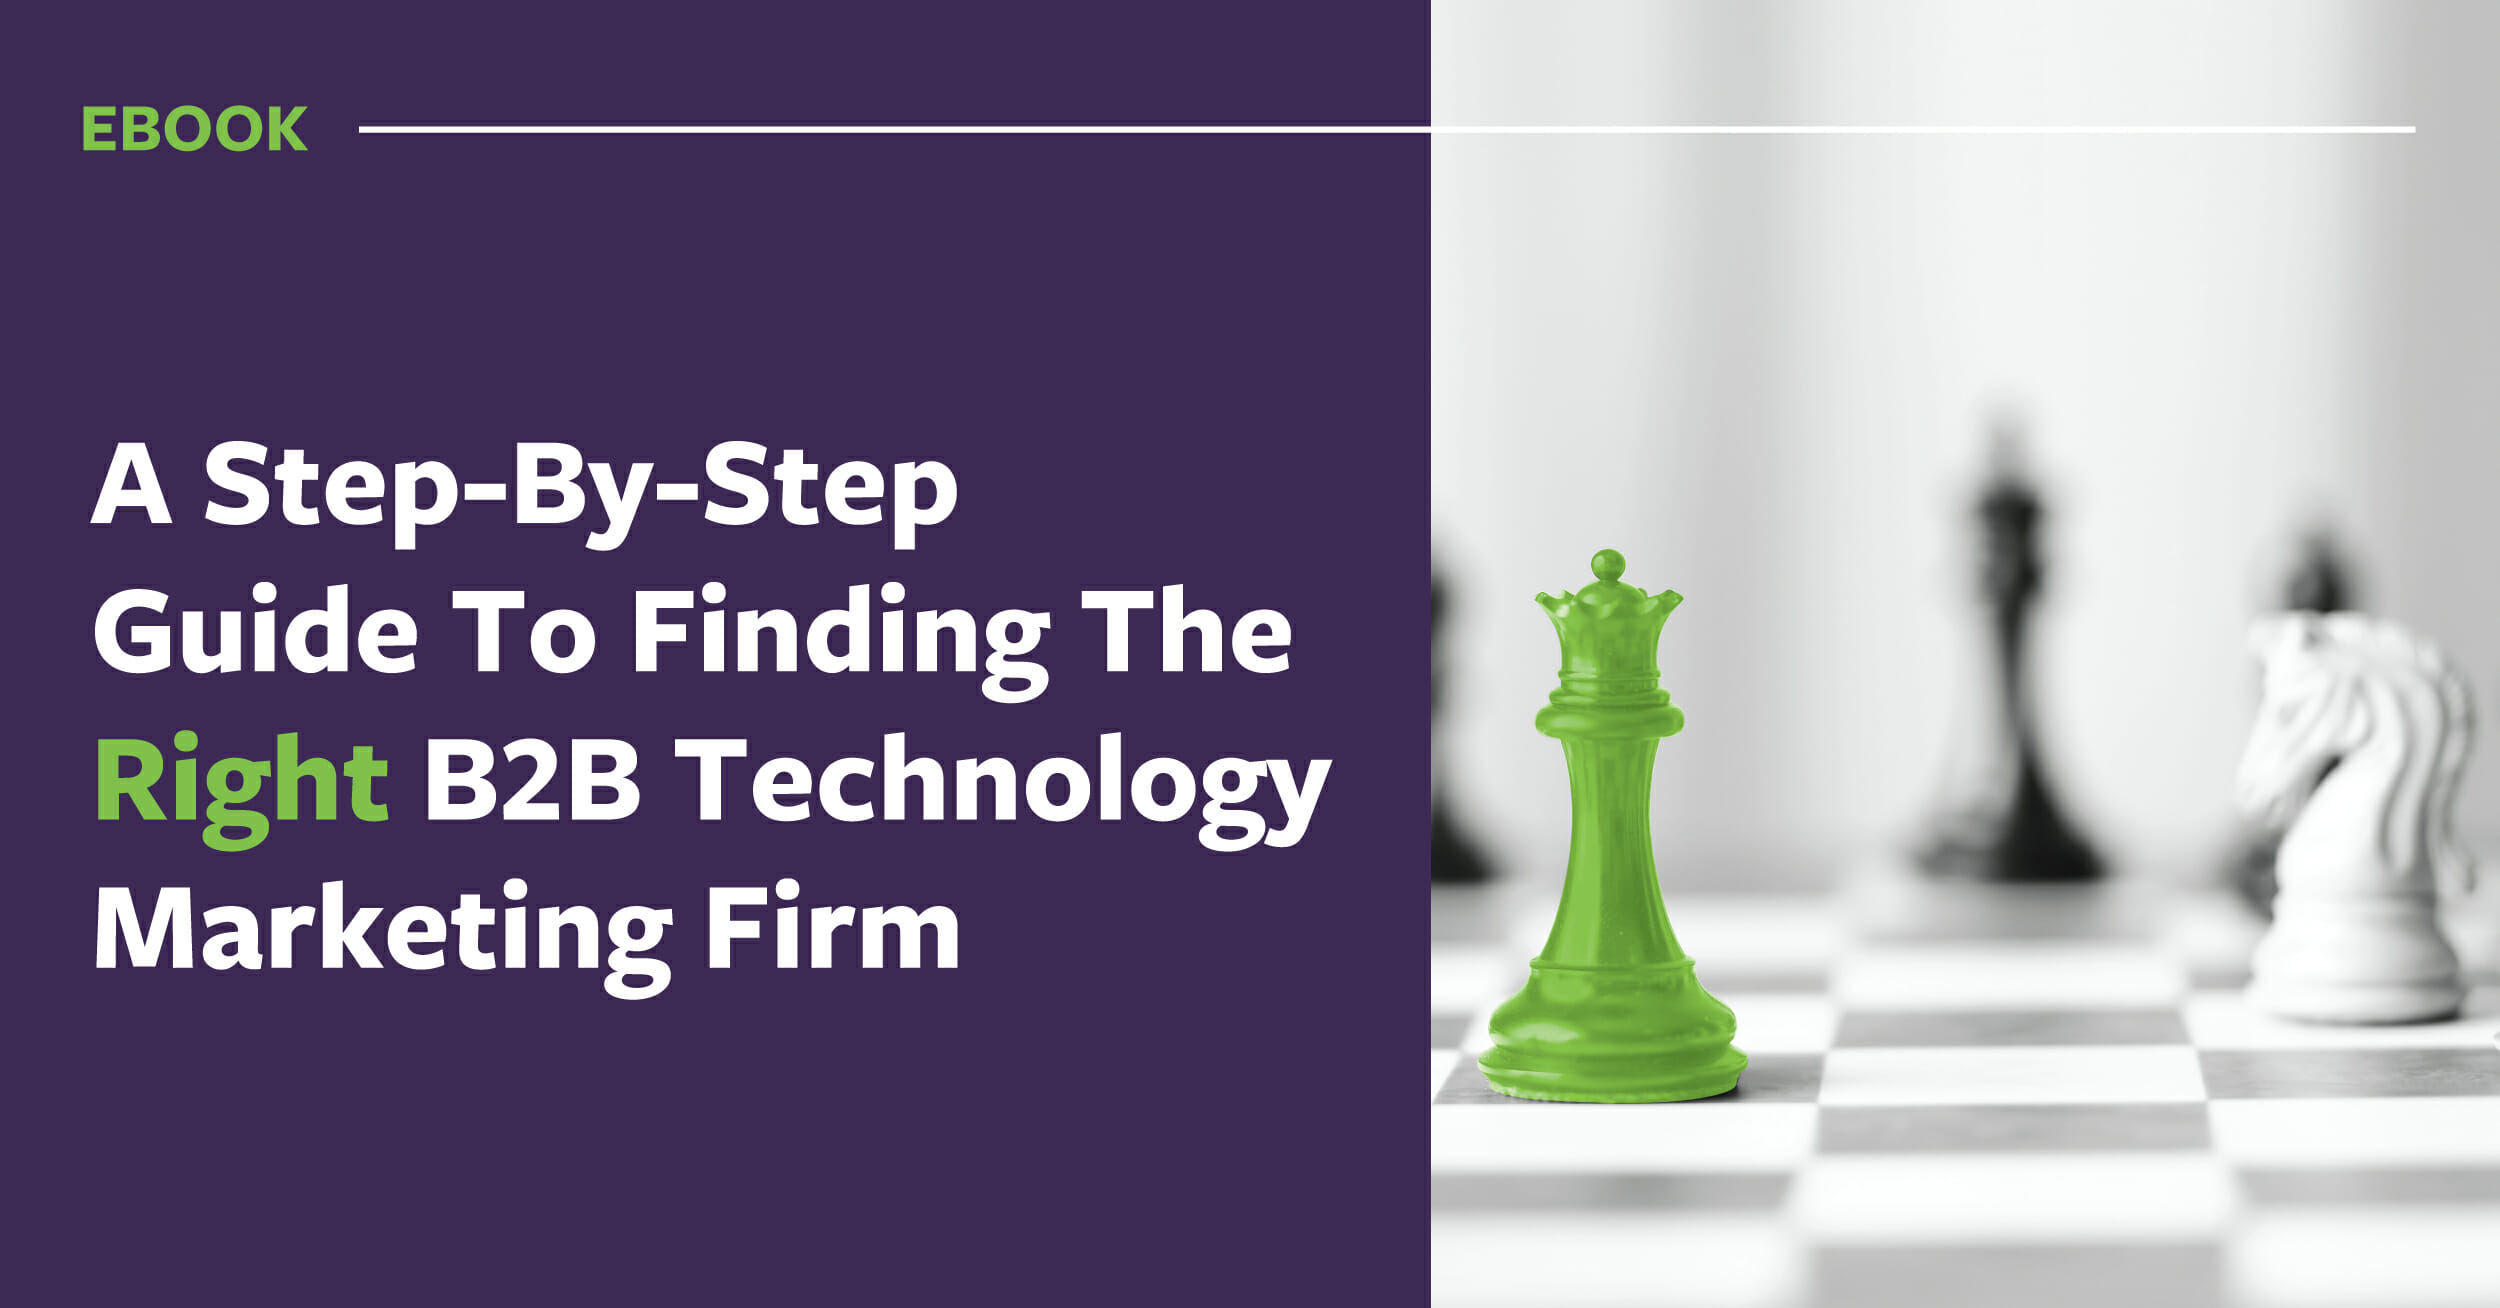 thumbnail image for [eBook] A Step-By-Step Guide To Finding The Right B2B Technology Marketing Firm